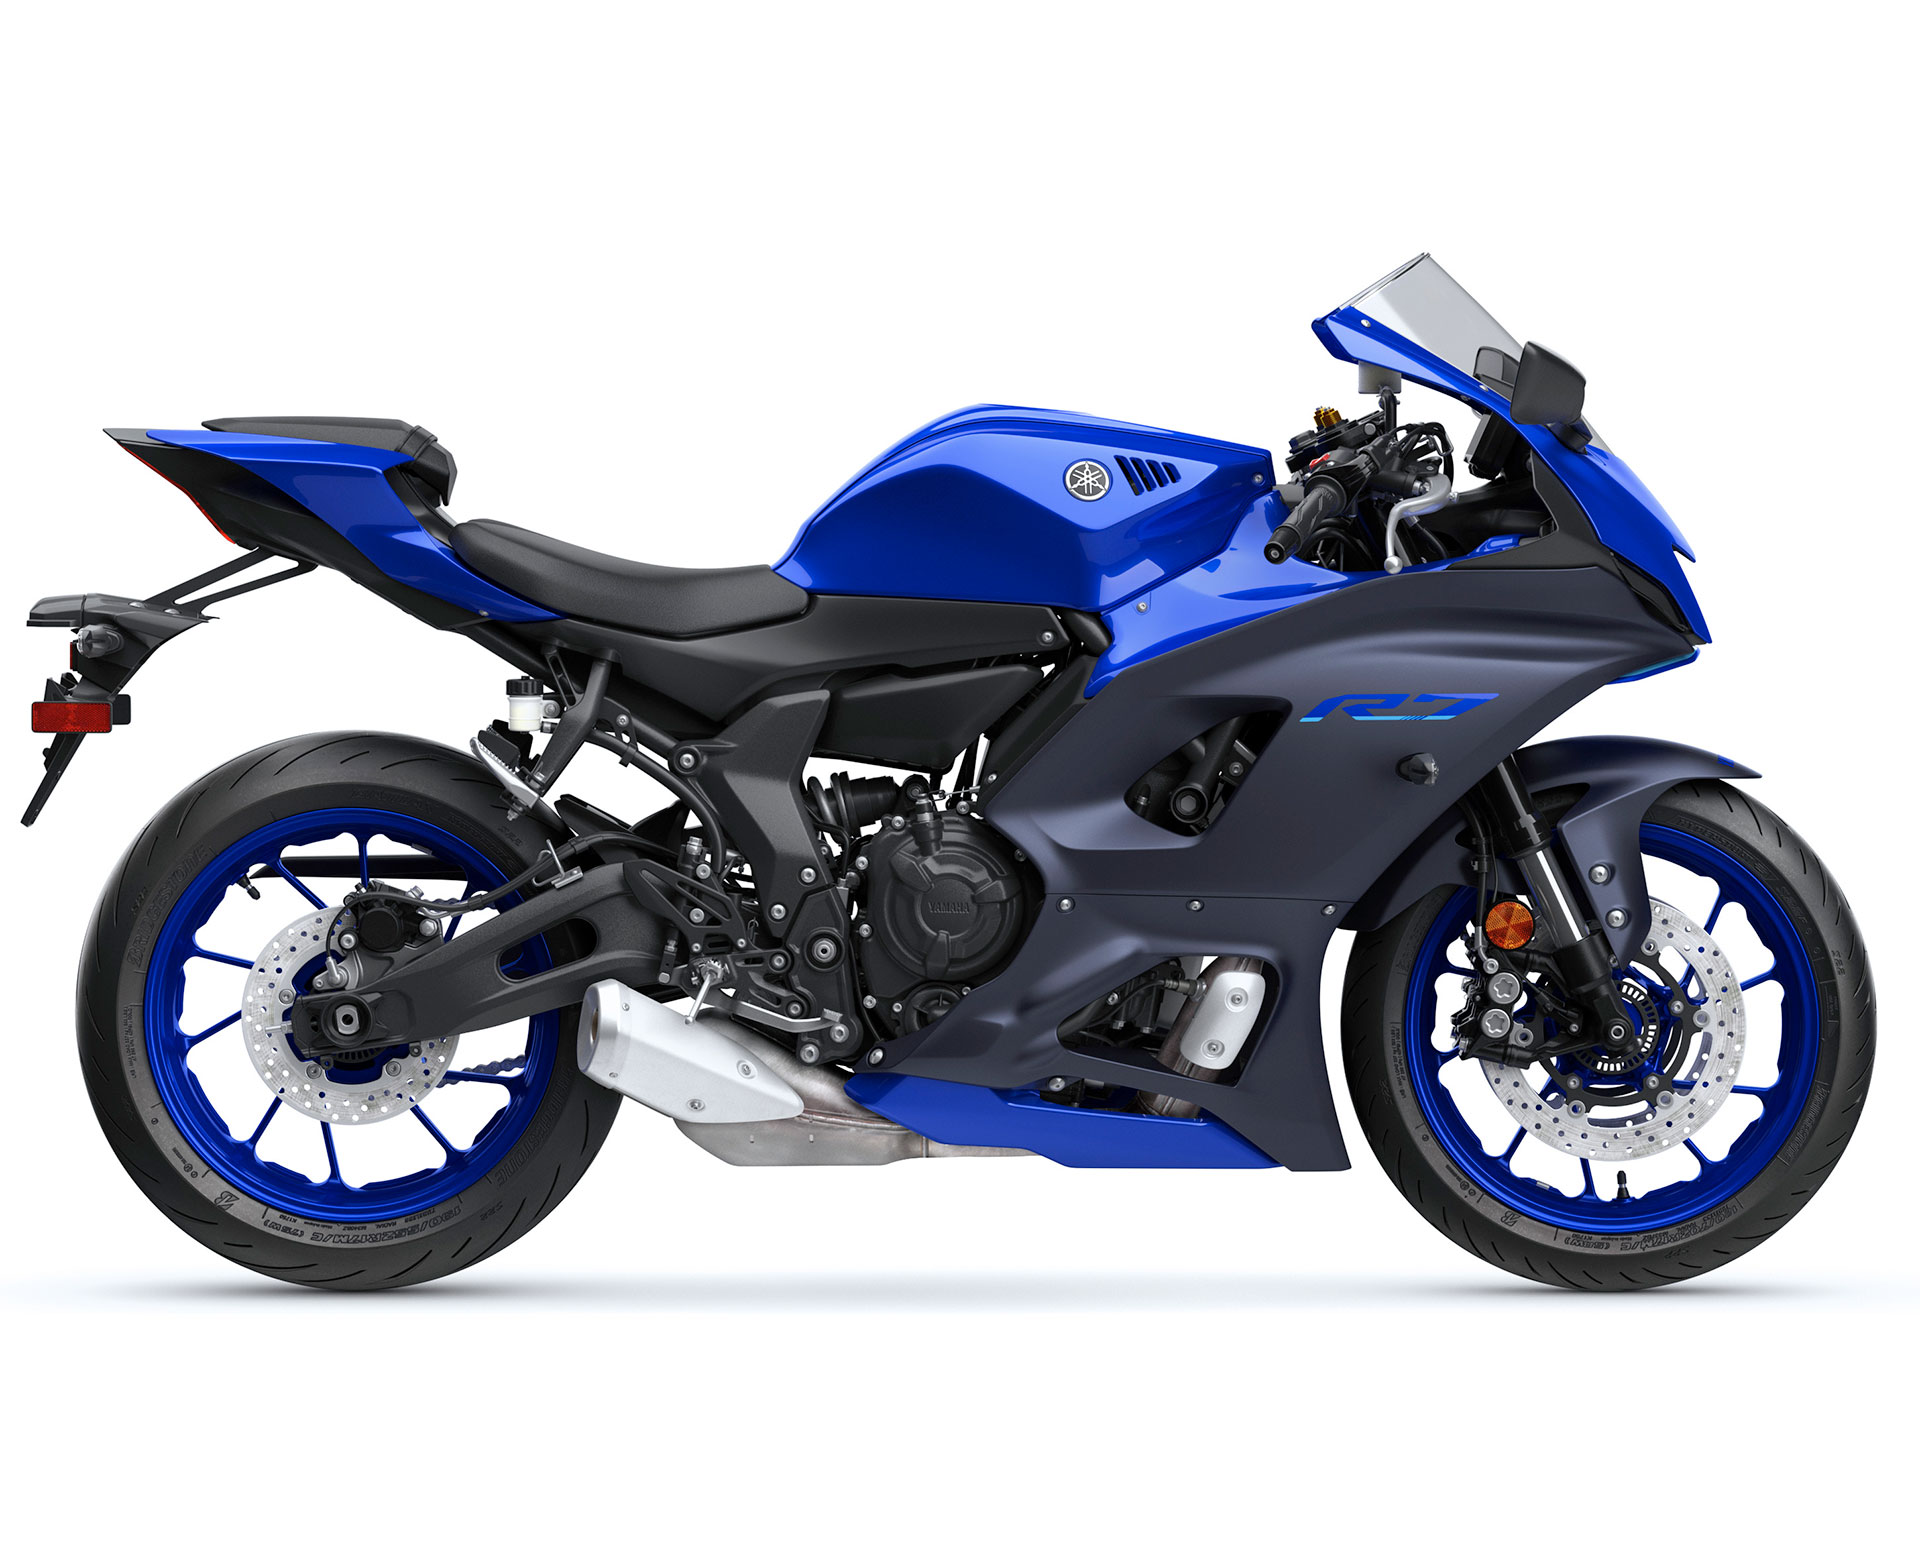 Thumbnail of your customized 2023 YZF-R7